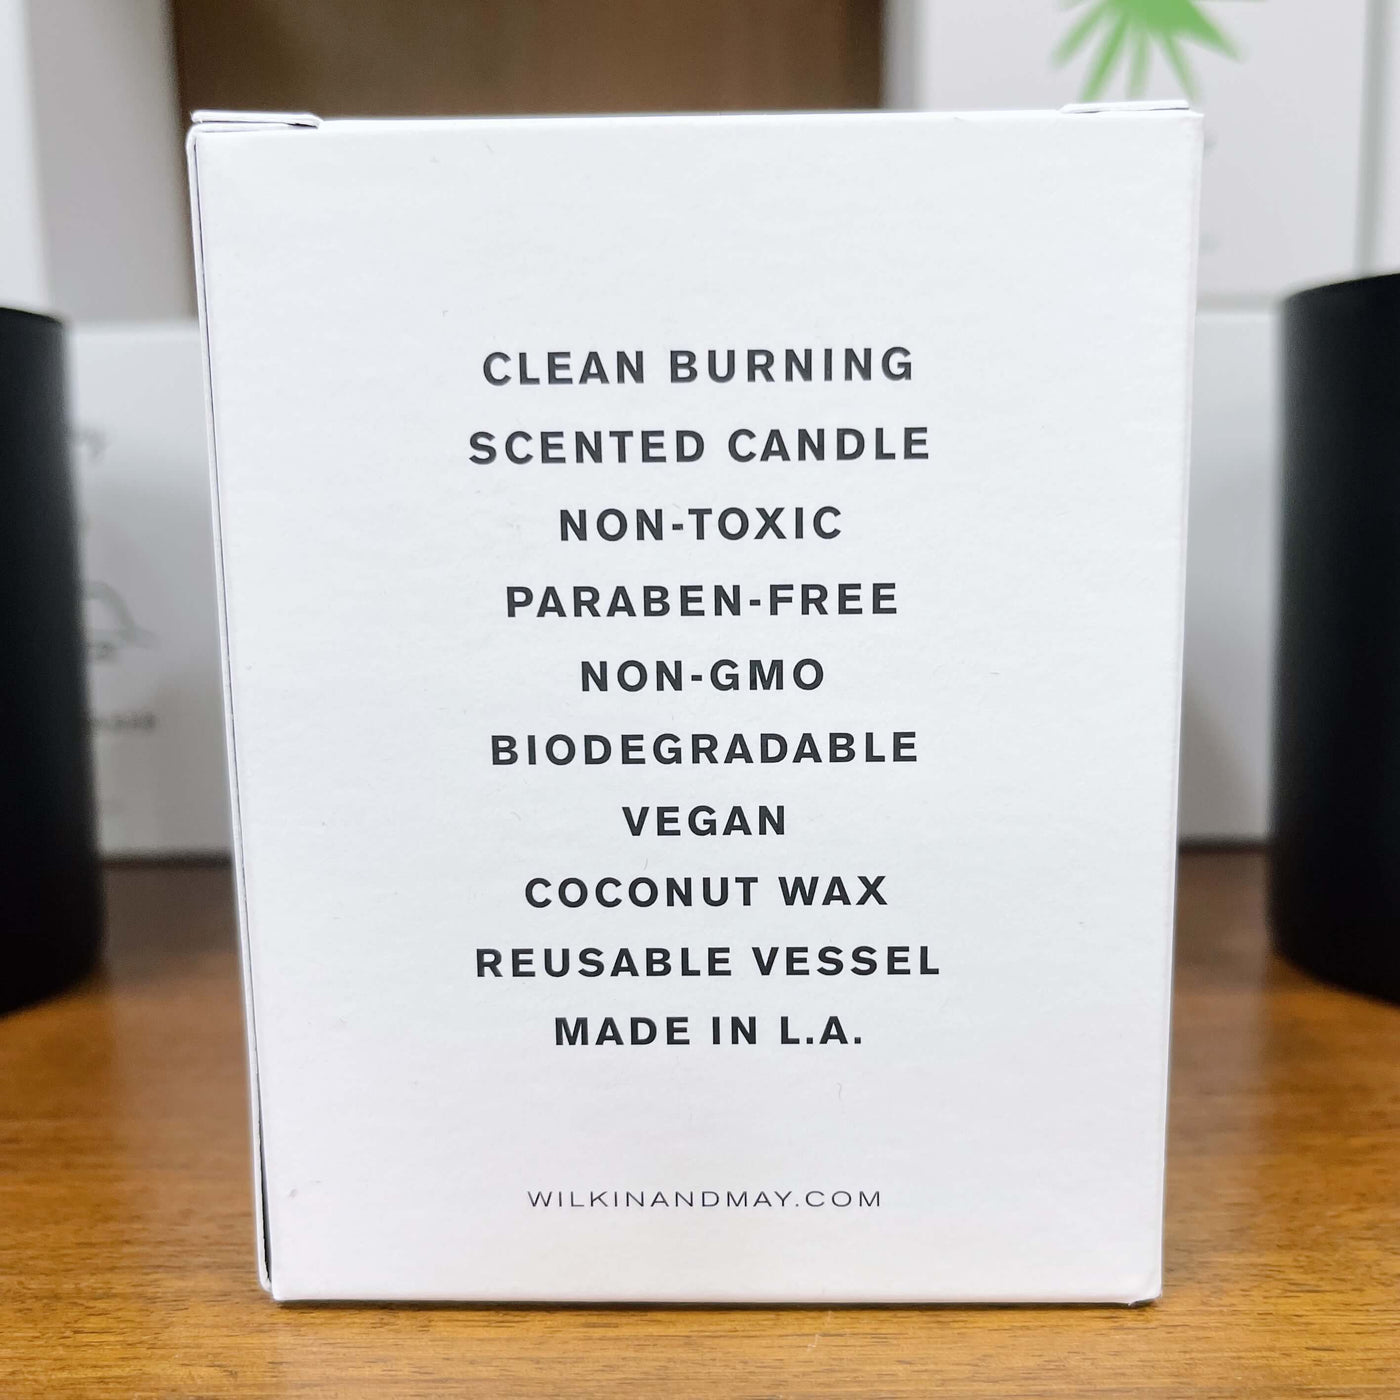 Back of candle box reads clean burning, scented candle, non-toxic, paraben-free, non-gmo, biodegradeable, vegan, coconut wax, resuable vessel, made in L.A.